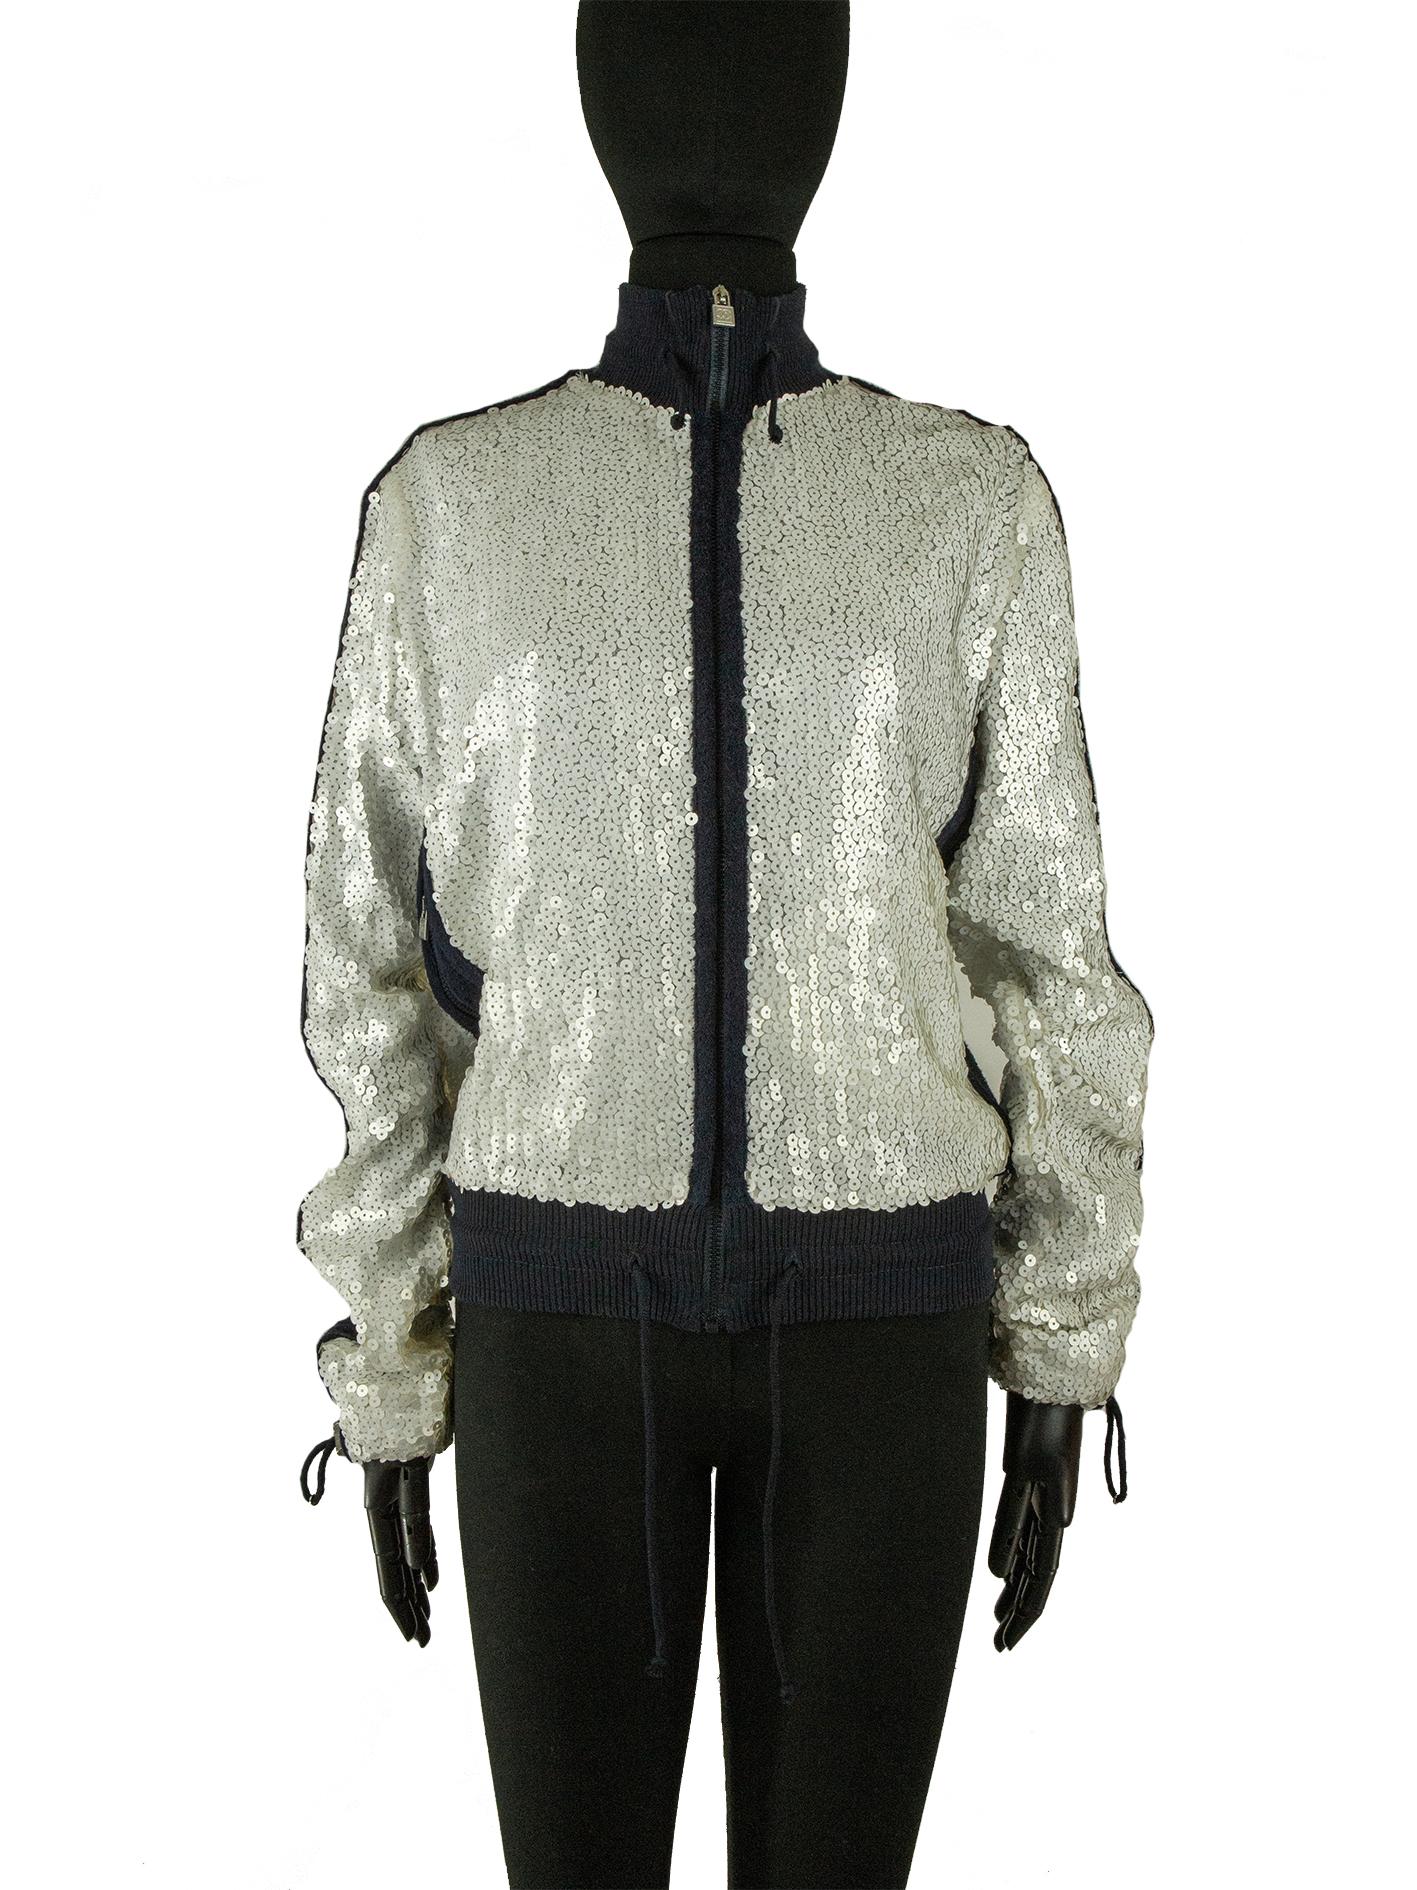 Women's Chanel 2008 Cruise Collection Sequin Jacket